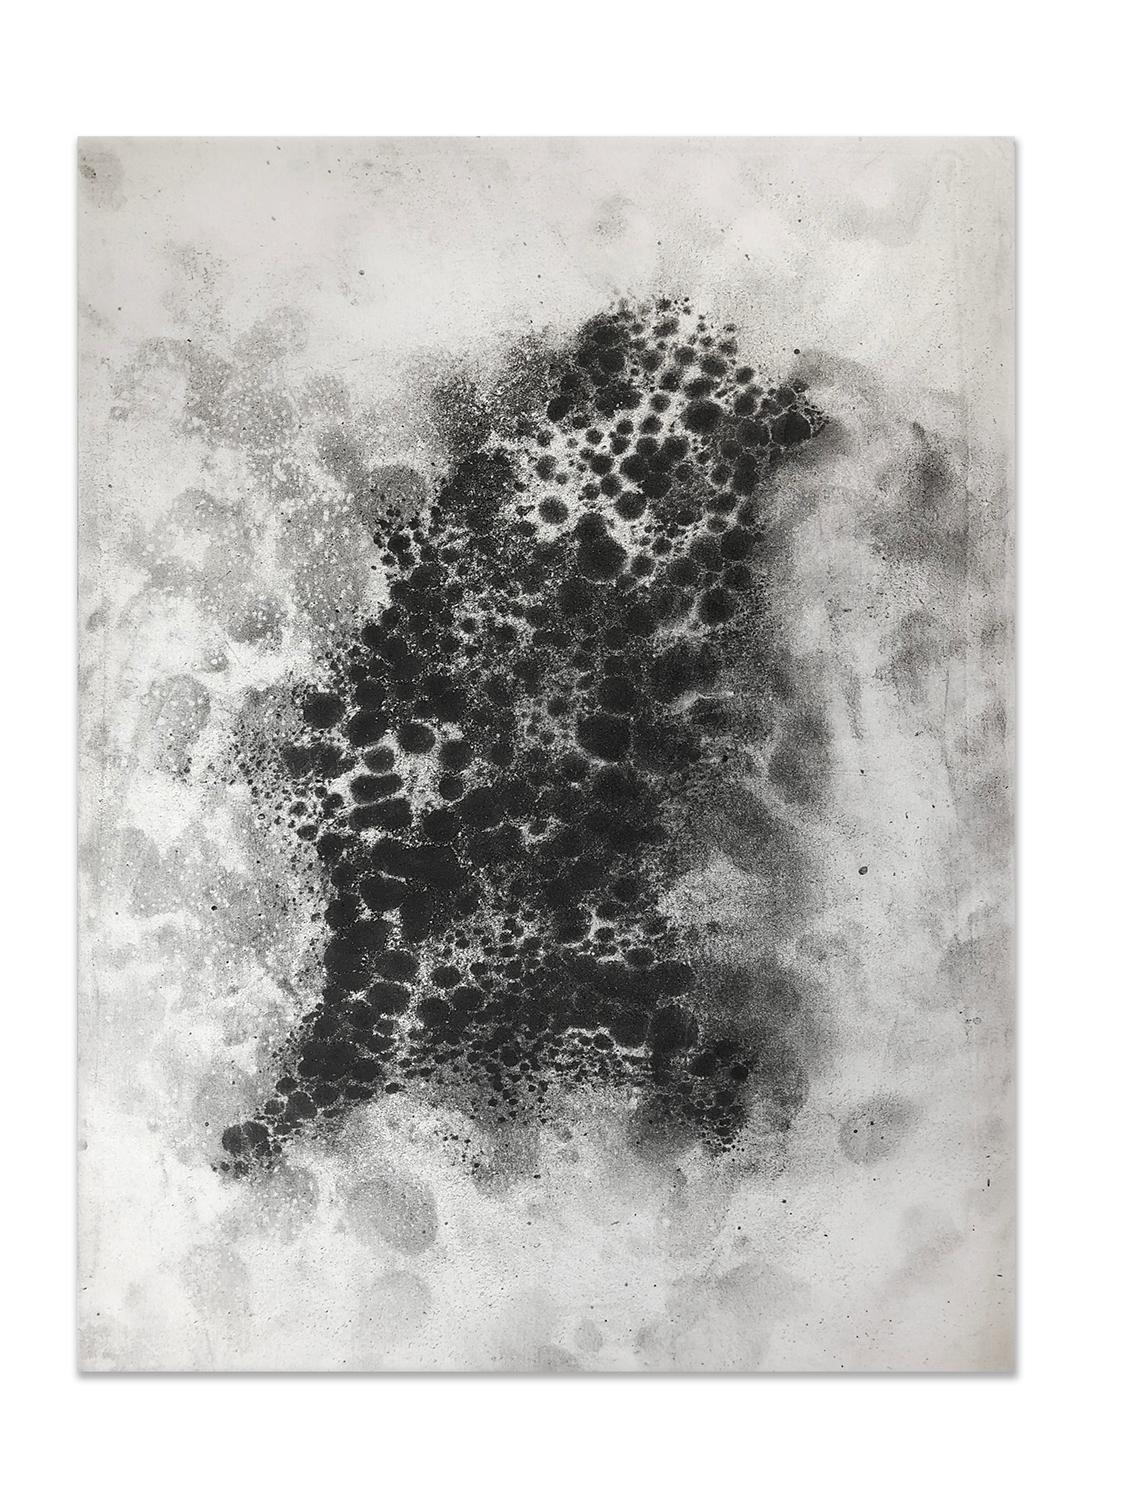 Ash Ceniza #3, (drawing, black and white, abstract, expressionist, ashes, paper) - Mixed Media Art by Kurtis Brand